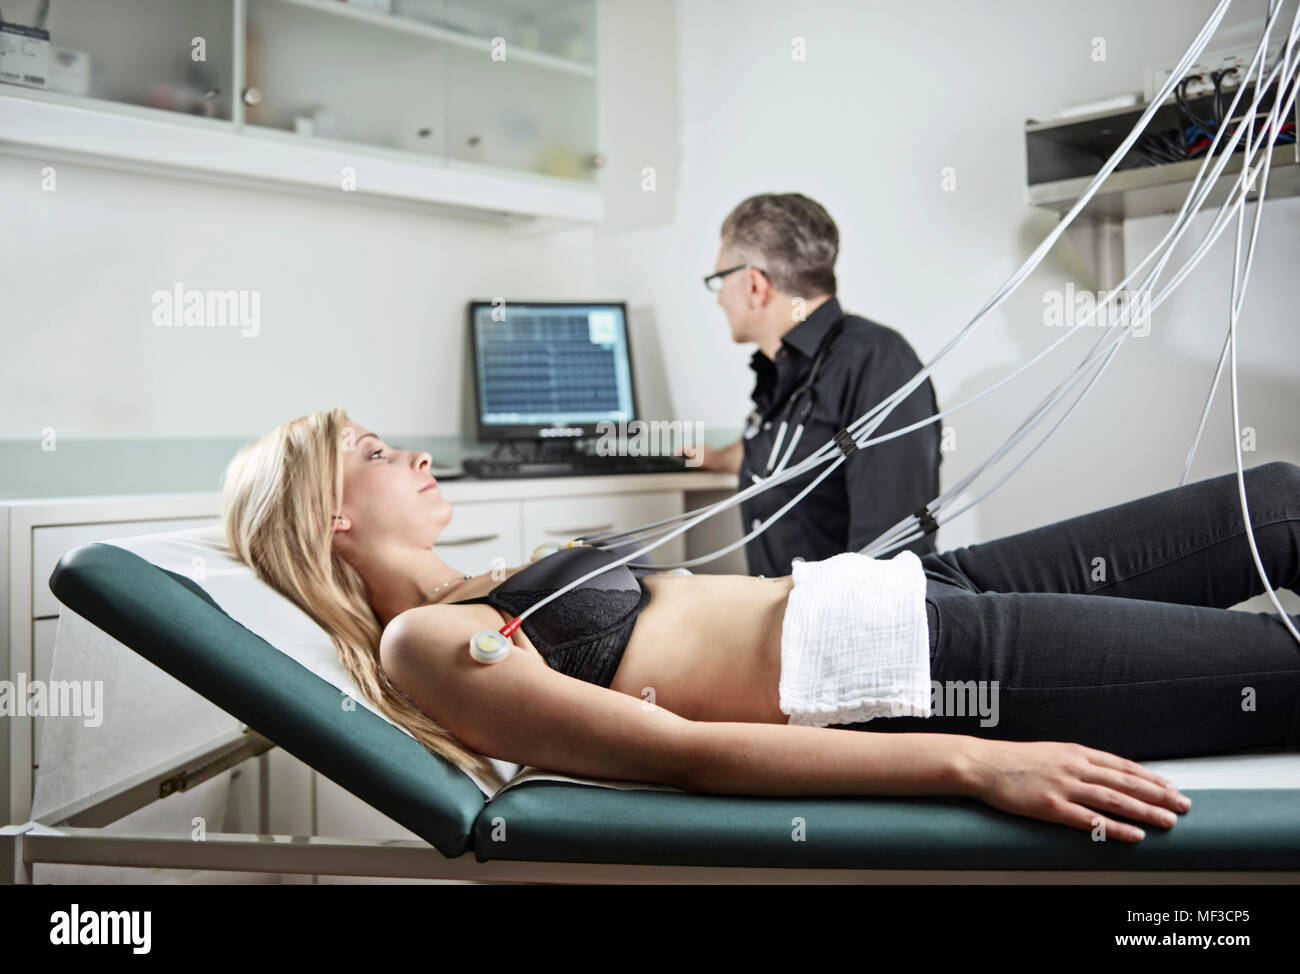 Woman in hospital getting heart rate monitored Stock Photo